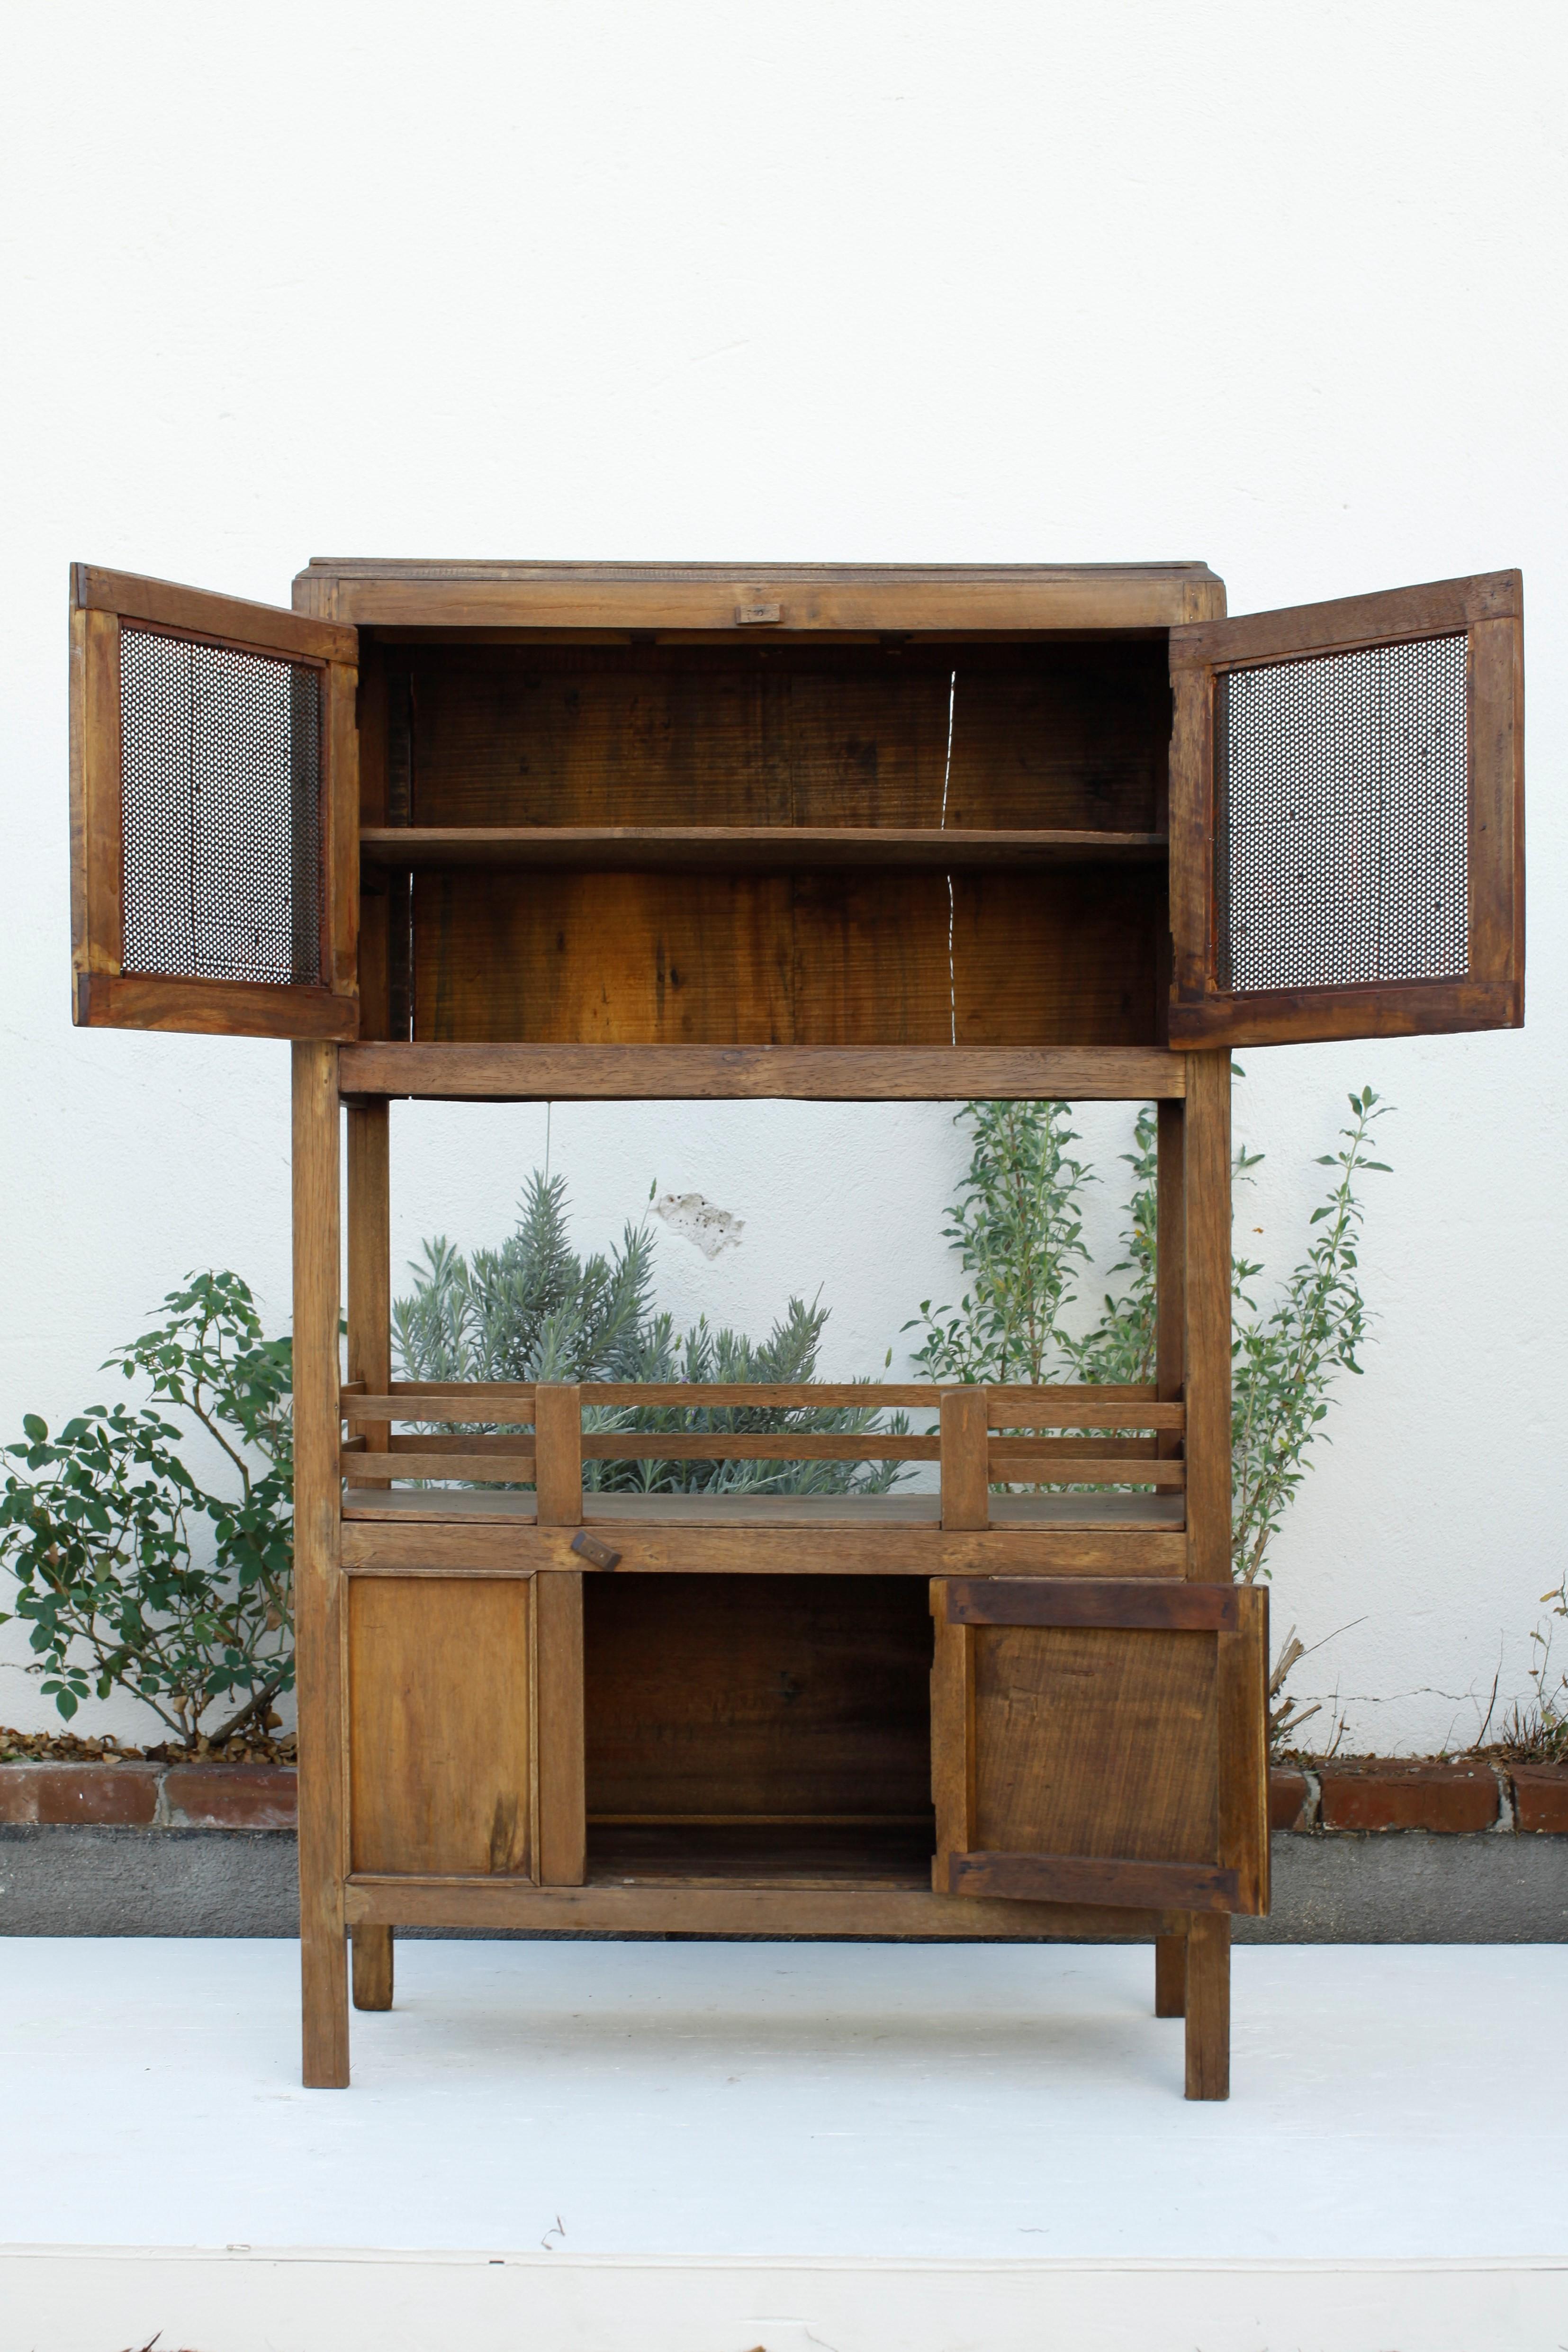 French Provincial French Colonial Weathered Teak Cabinet with Metal Screen Doors 1930's For Sale